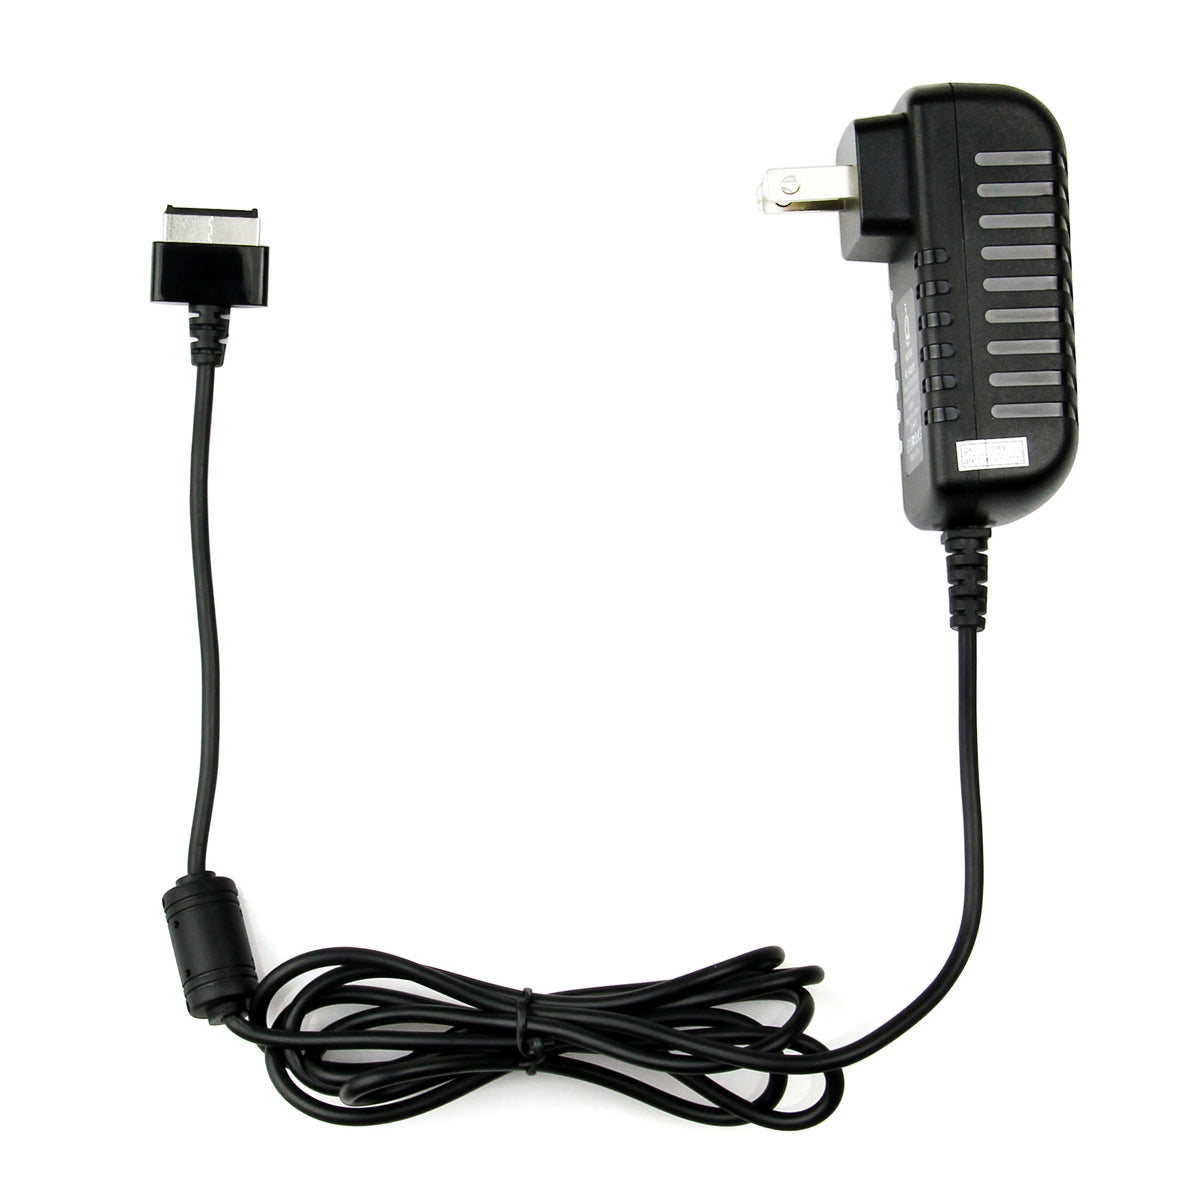 AC Adapter Charger for ASUS TF101 A2 Tablet.